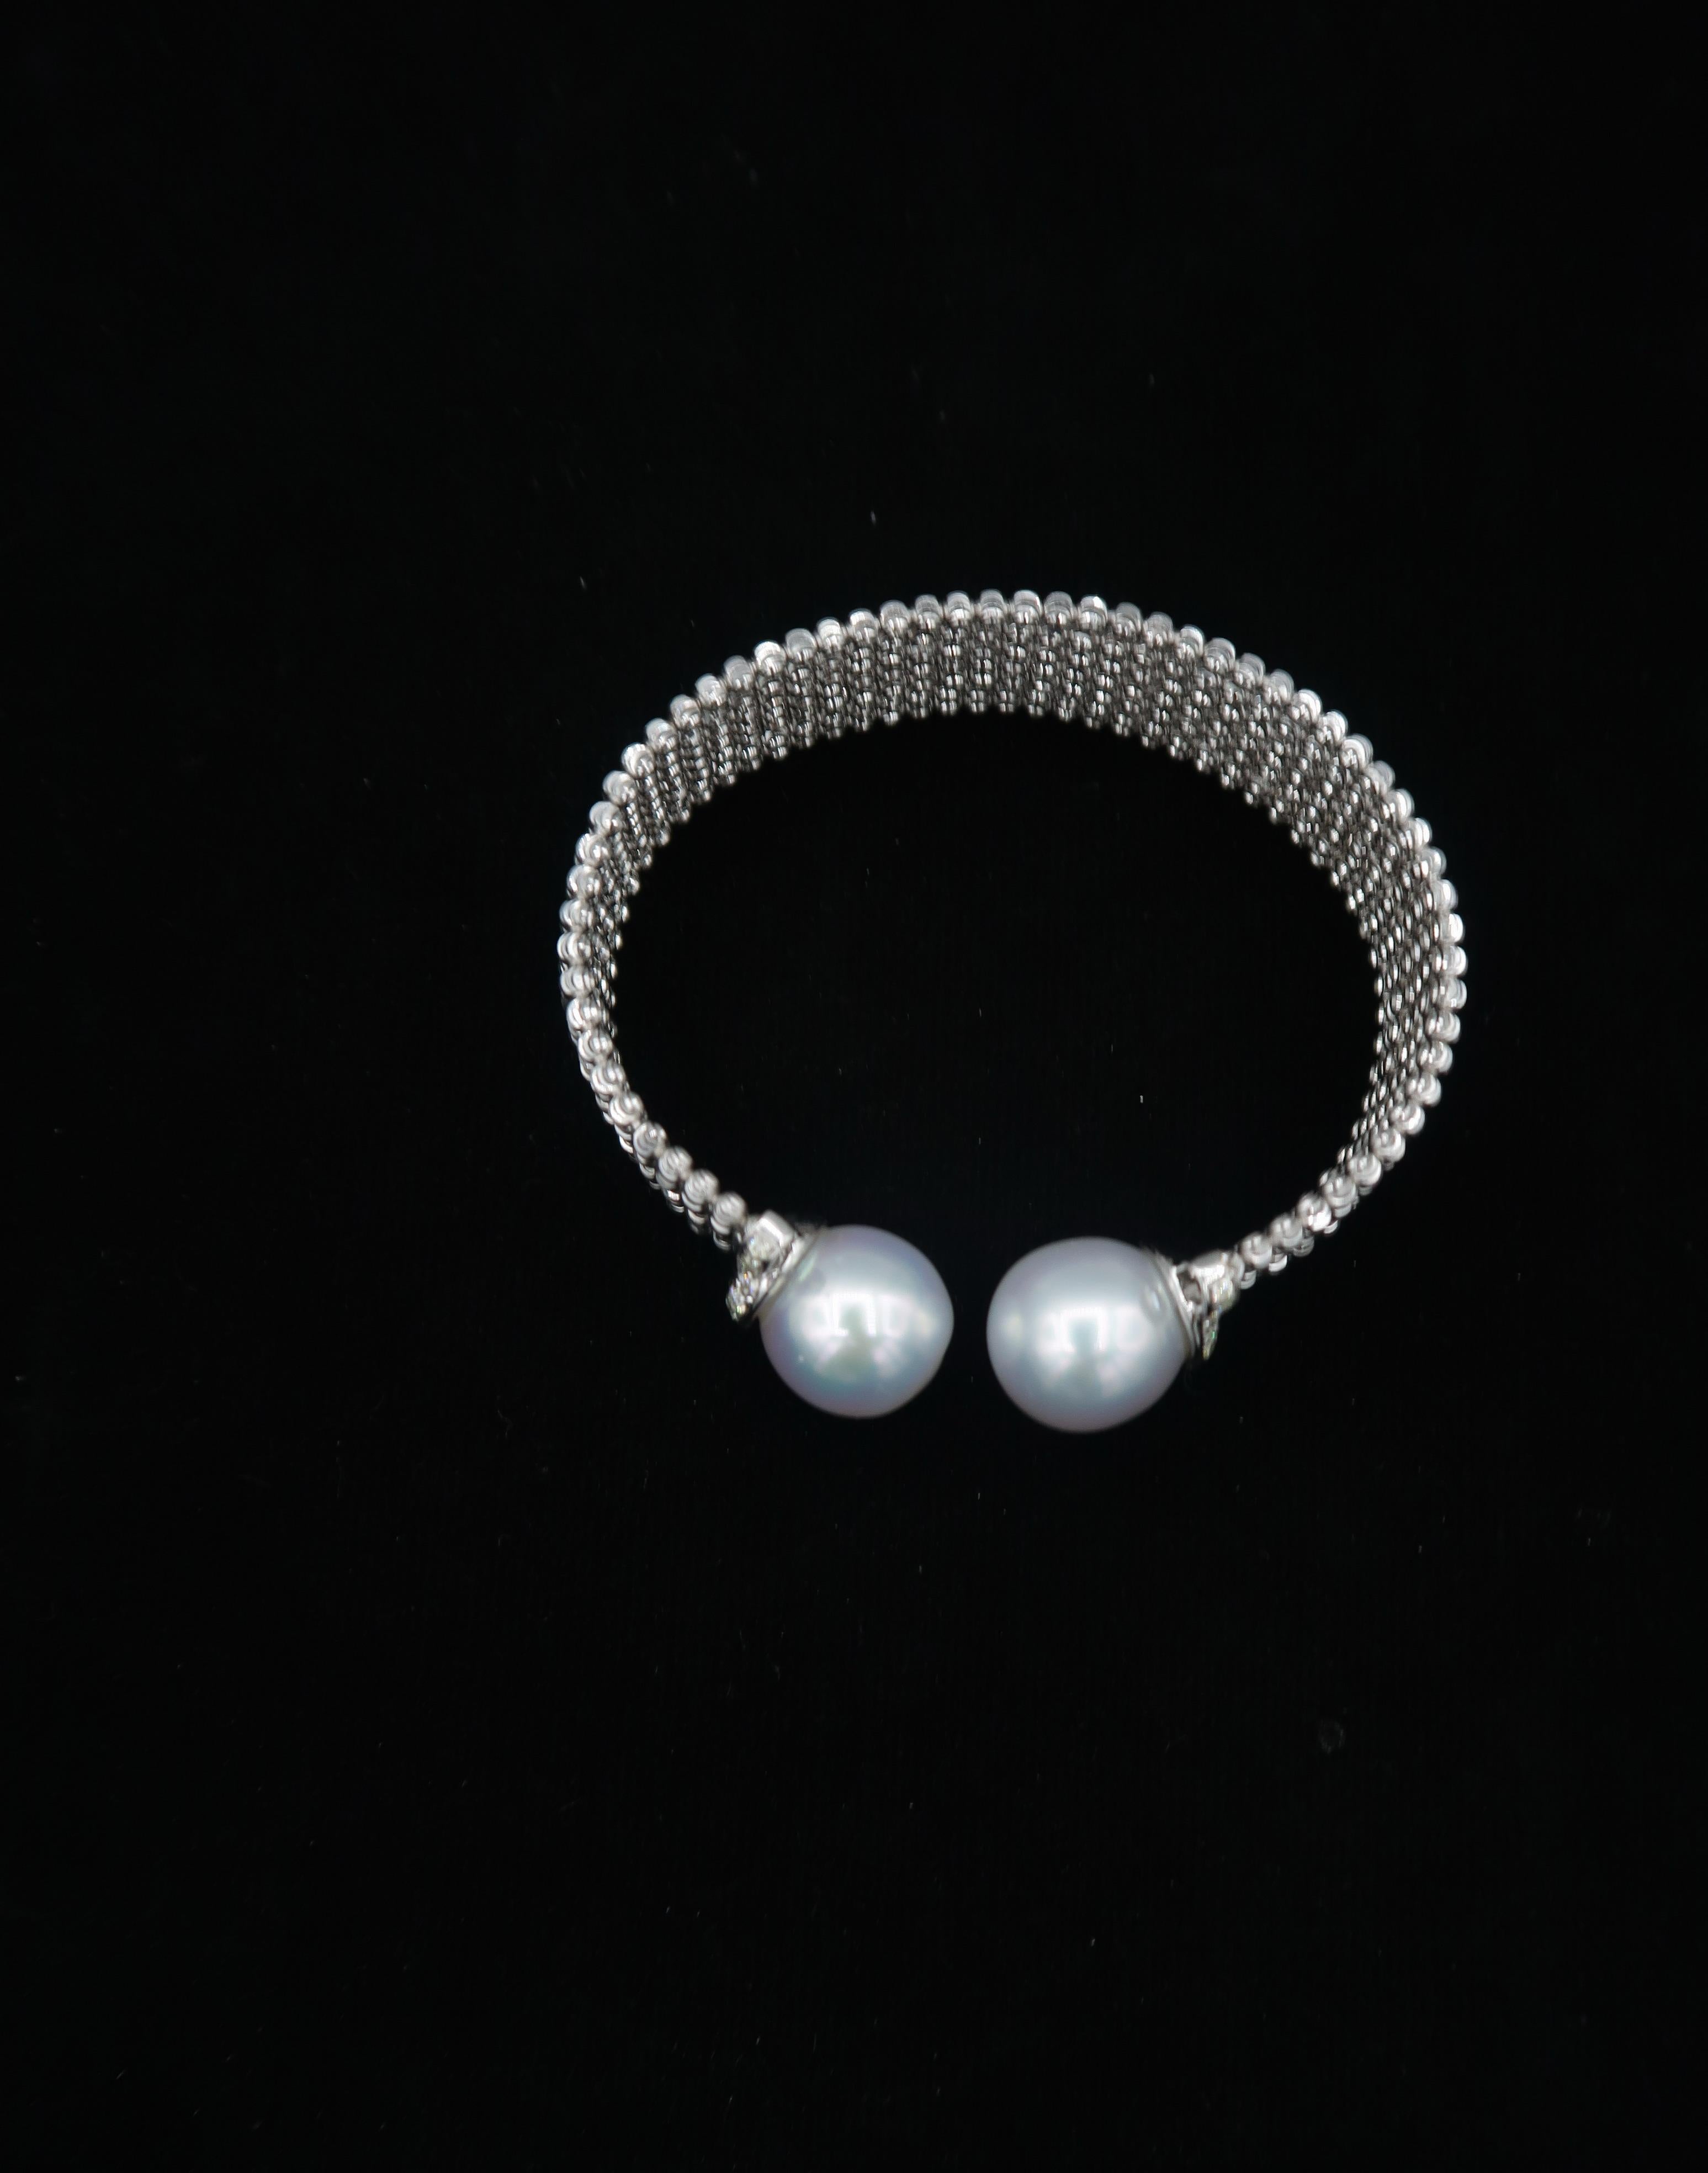 Women's Easy-to-Wear Spring Open Bangle in 18K Gold w/ Diamonds & White South Sea Pearls For Sale